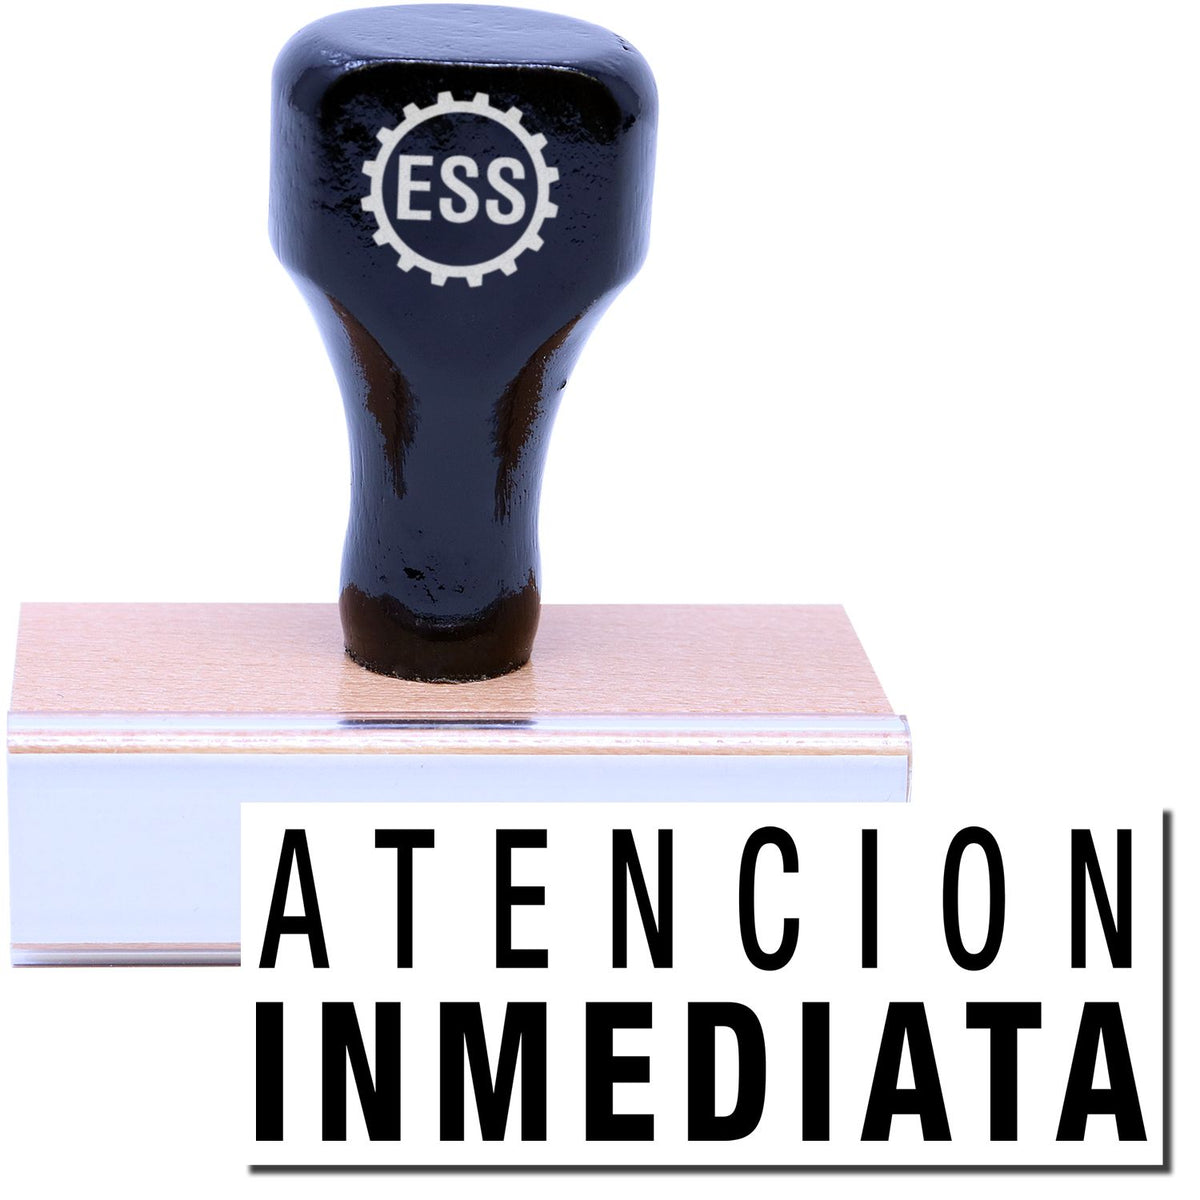 A stock office rubber stamp with a stamped image showing how the text &quot;ATENCION INMEDIATA&quot; in a large font is displayed after stamping.